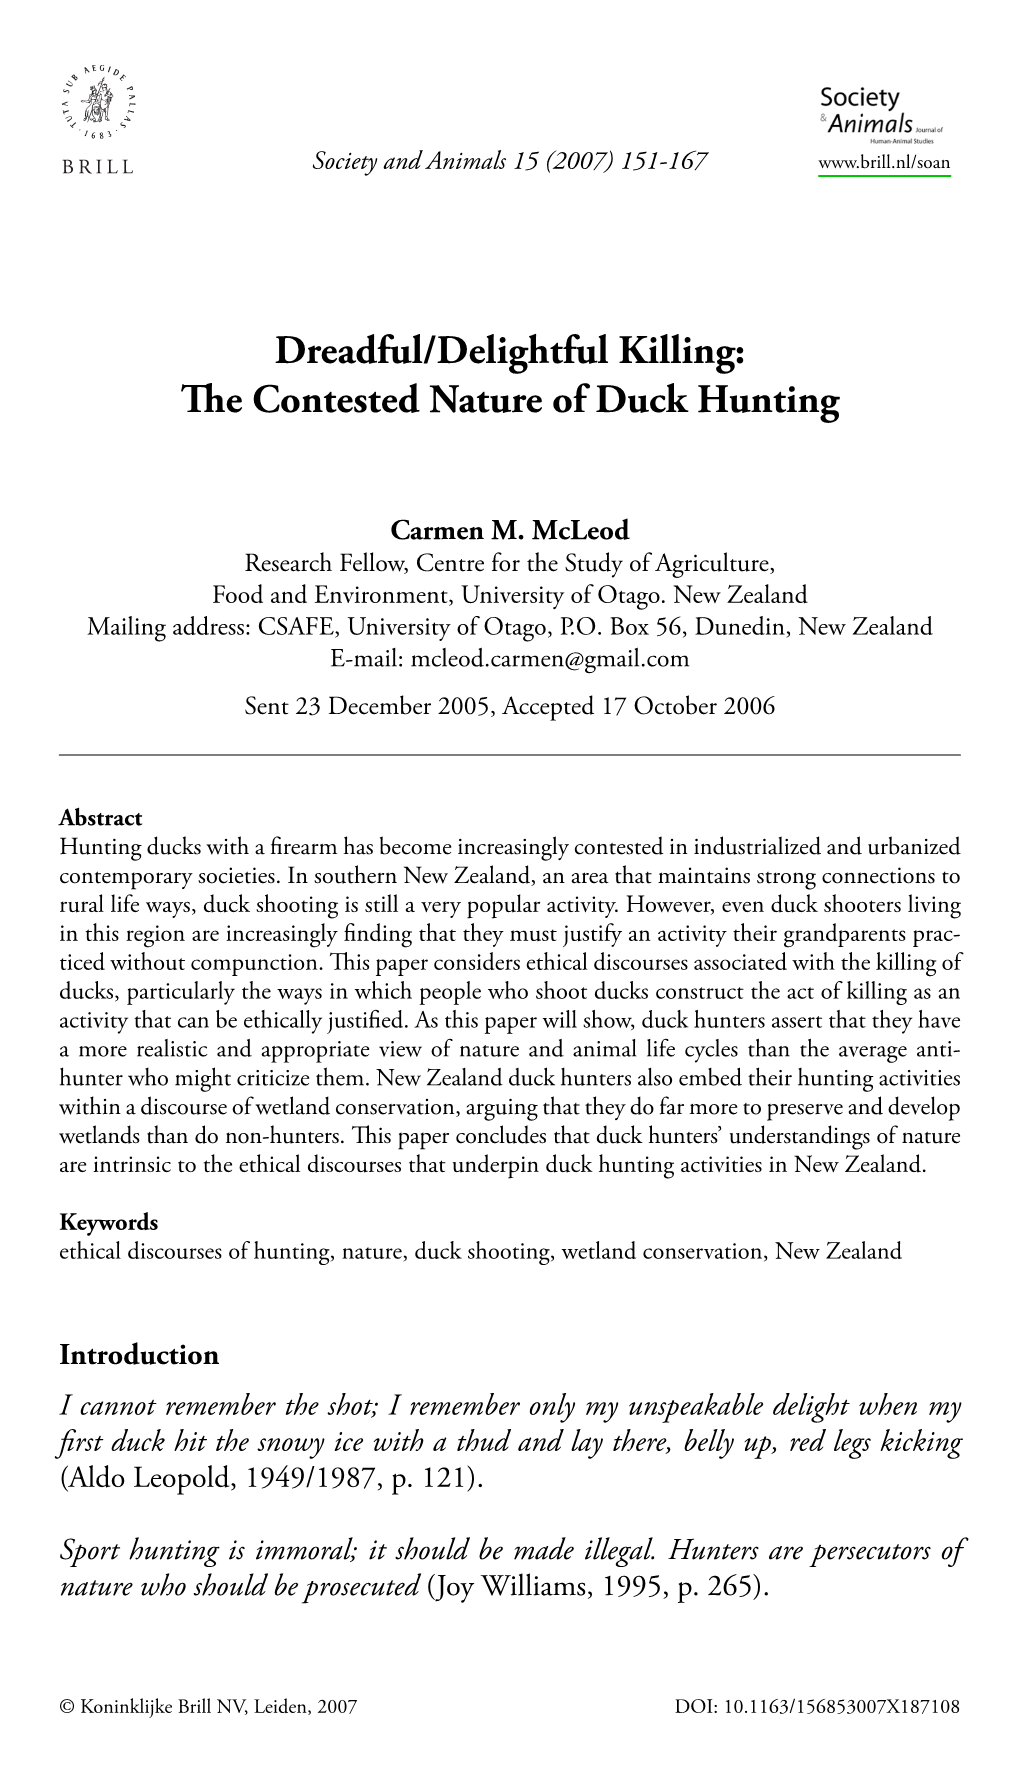 Dreadful/Delightful Killing: the Contested Nature of Duck Hunting